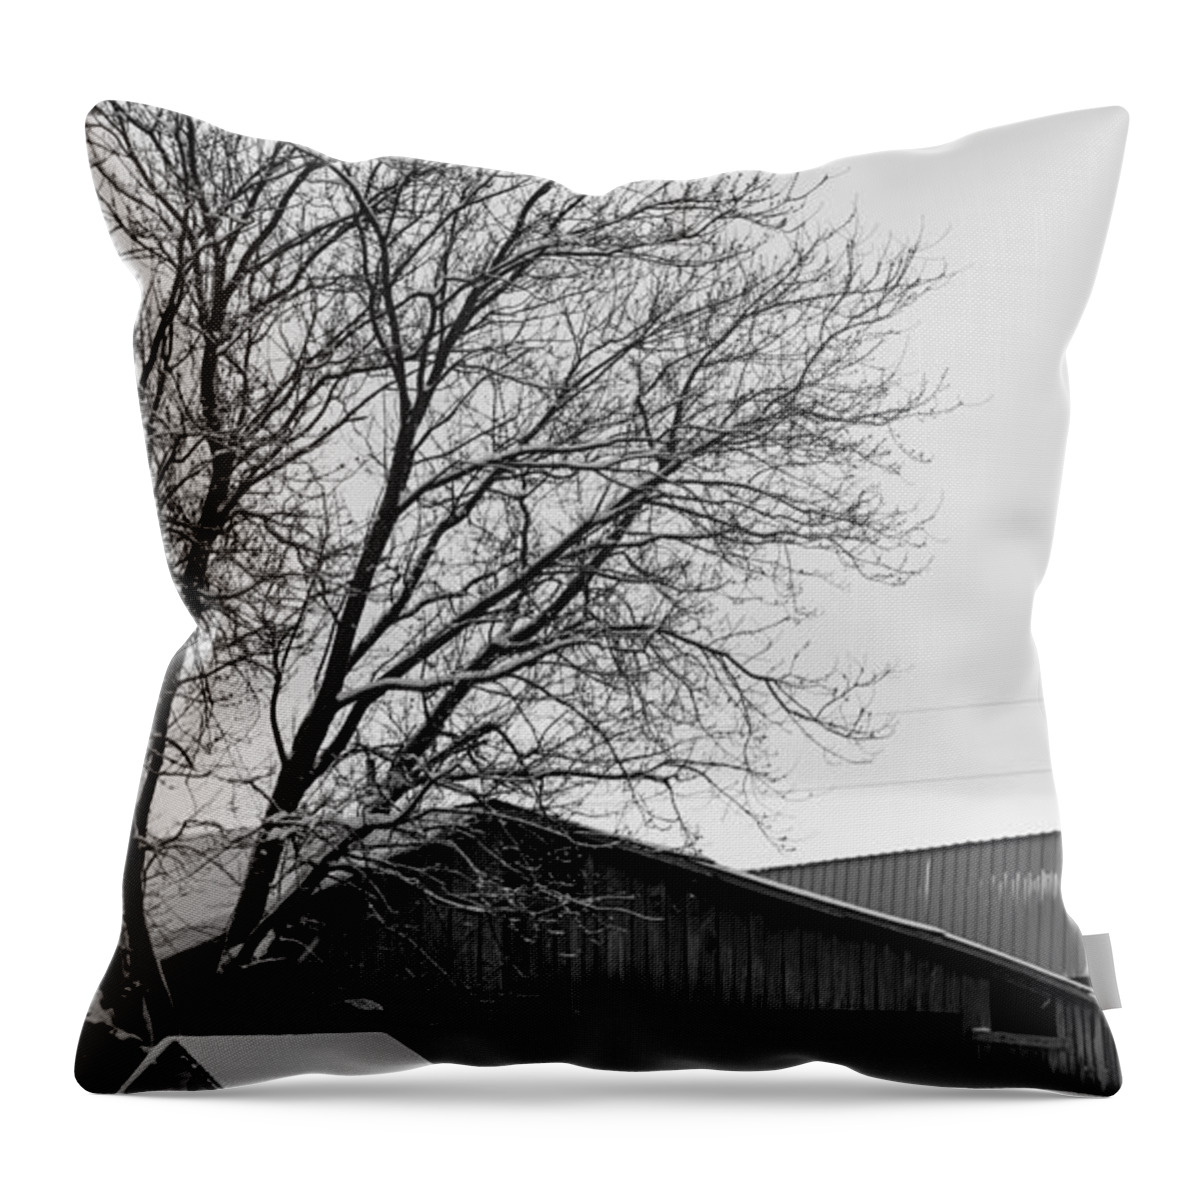 Snow Throw Pillow featuring the photograph Snow Scene by Holden The Moment